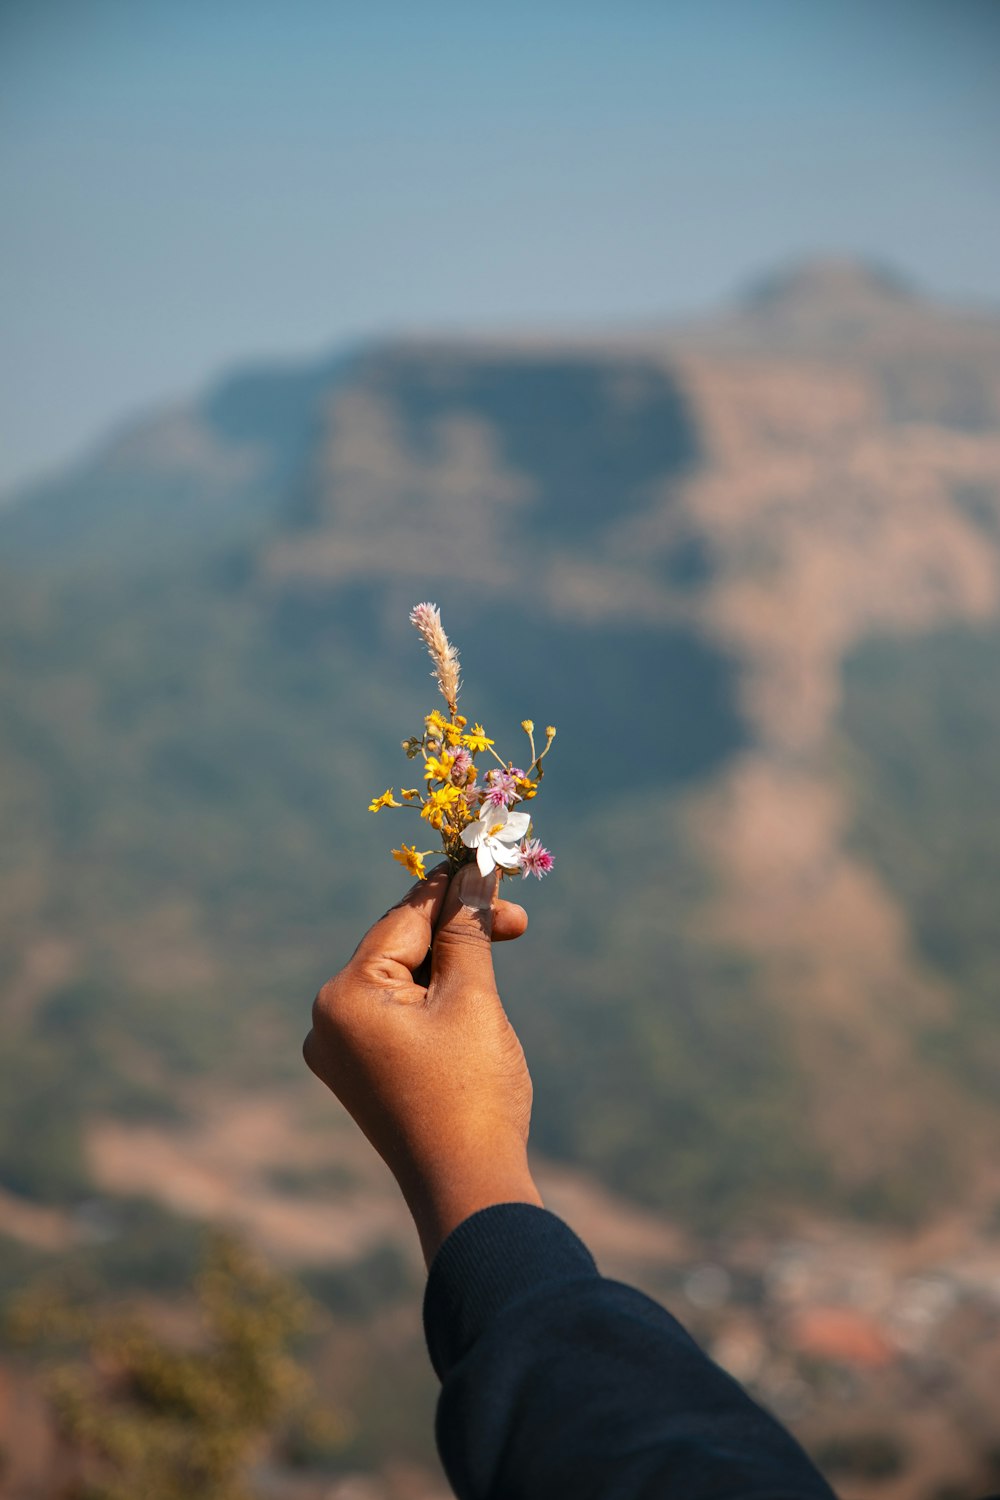 a person holding a small flower in their hand